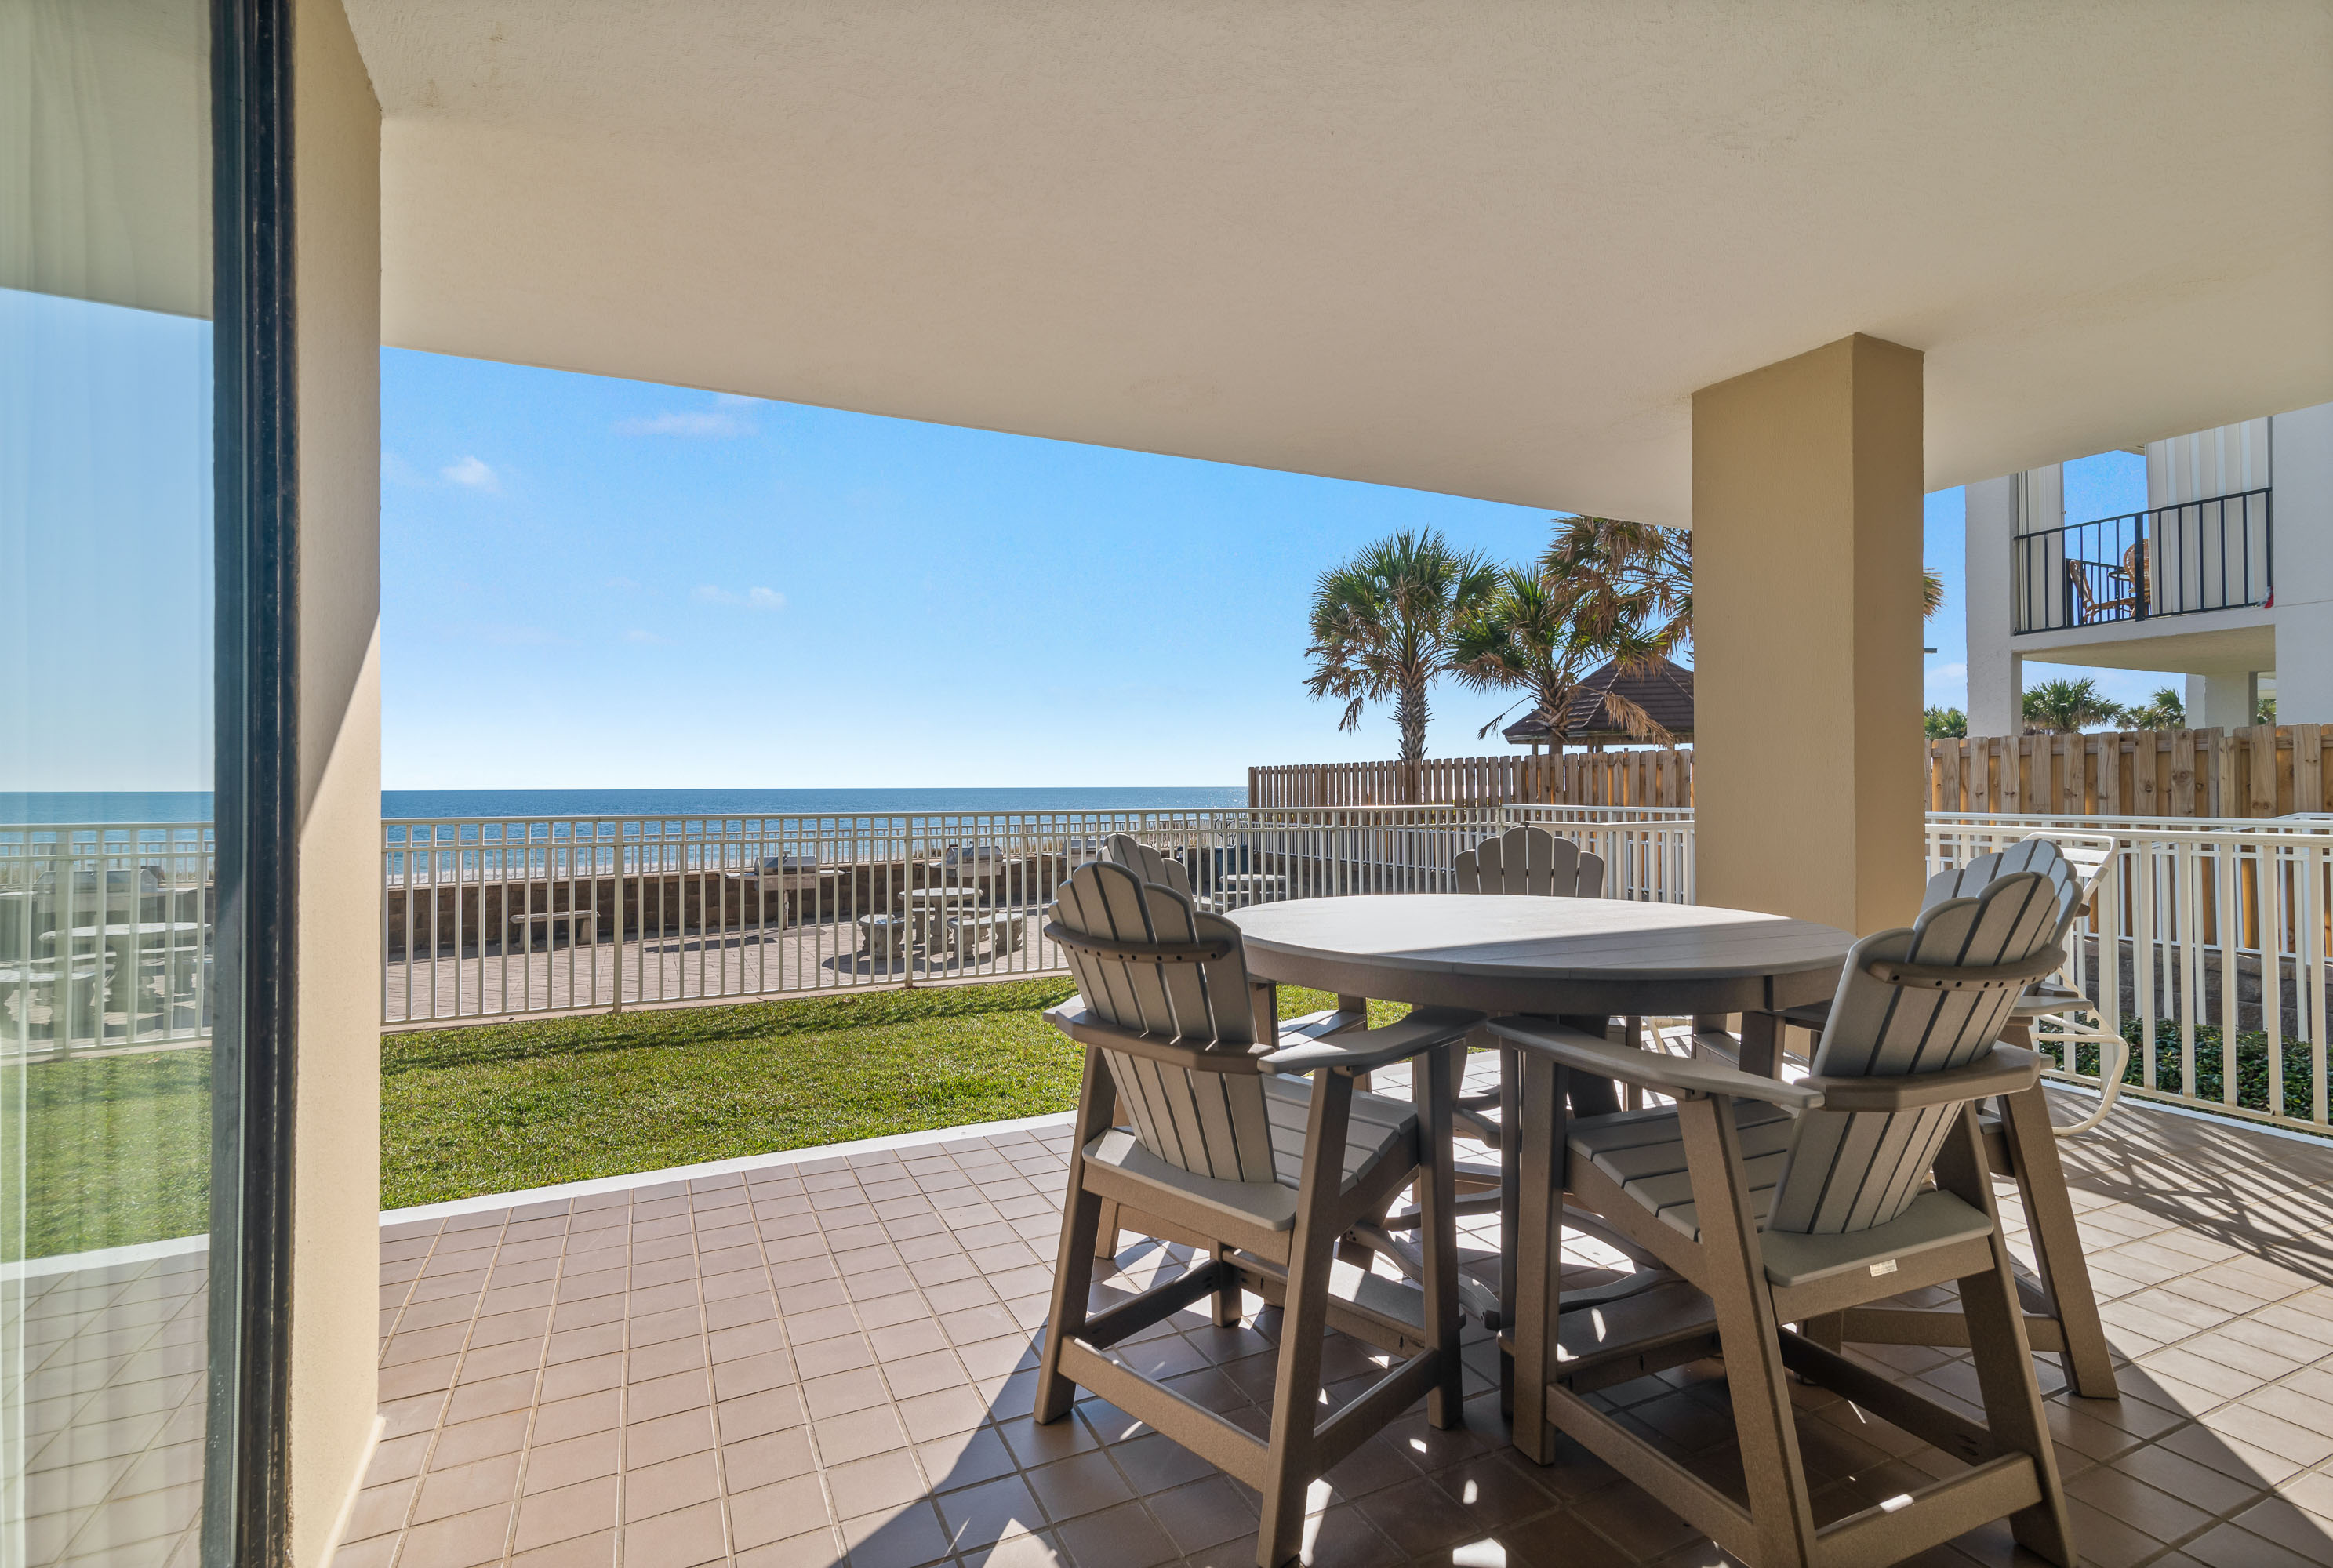 Ground Level Beachfront Patio for Easy Convenient Access to Pool, Grilling Out and Beach Access